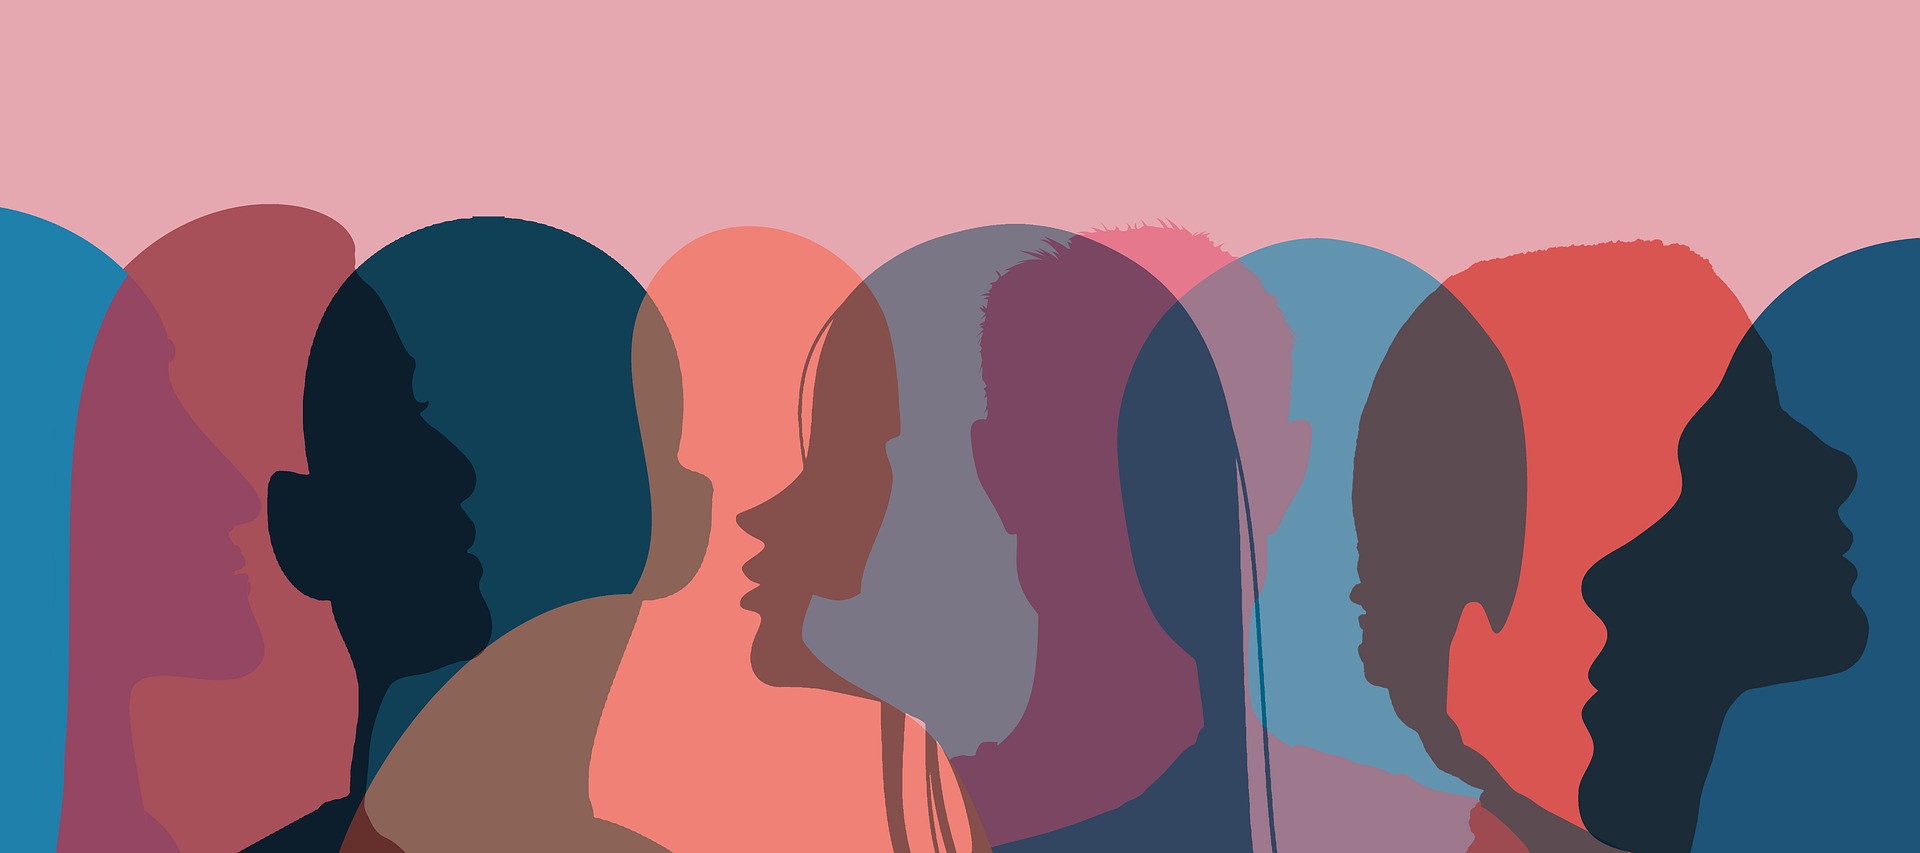 Illustration of overlapping silhouettes of heads in transgender colors, image by geralt on Pixabay